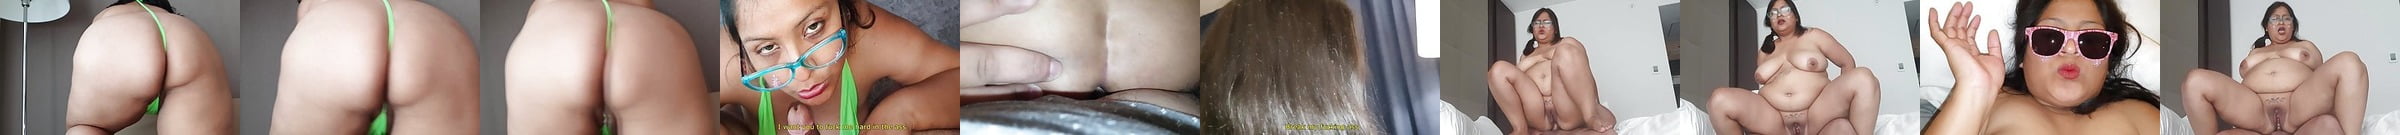 Featured Milfs On Vacation Are Touched And Fucked Porn Videos 8